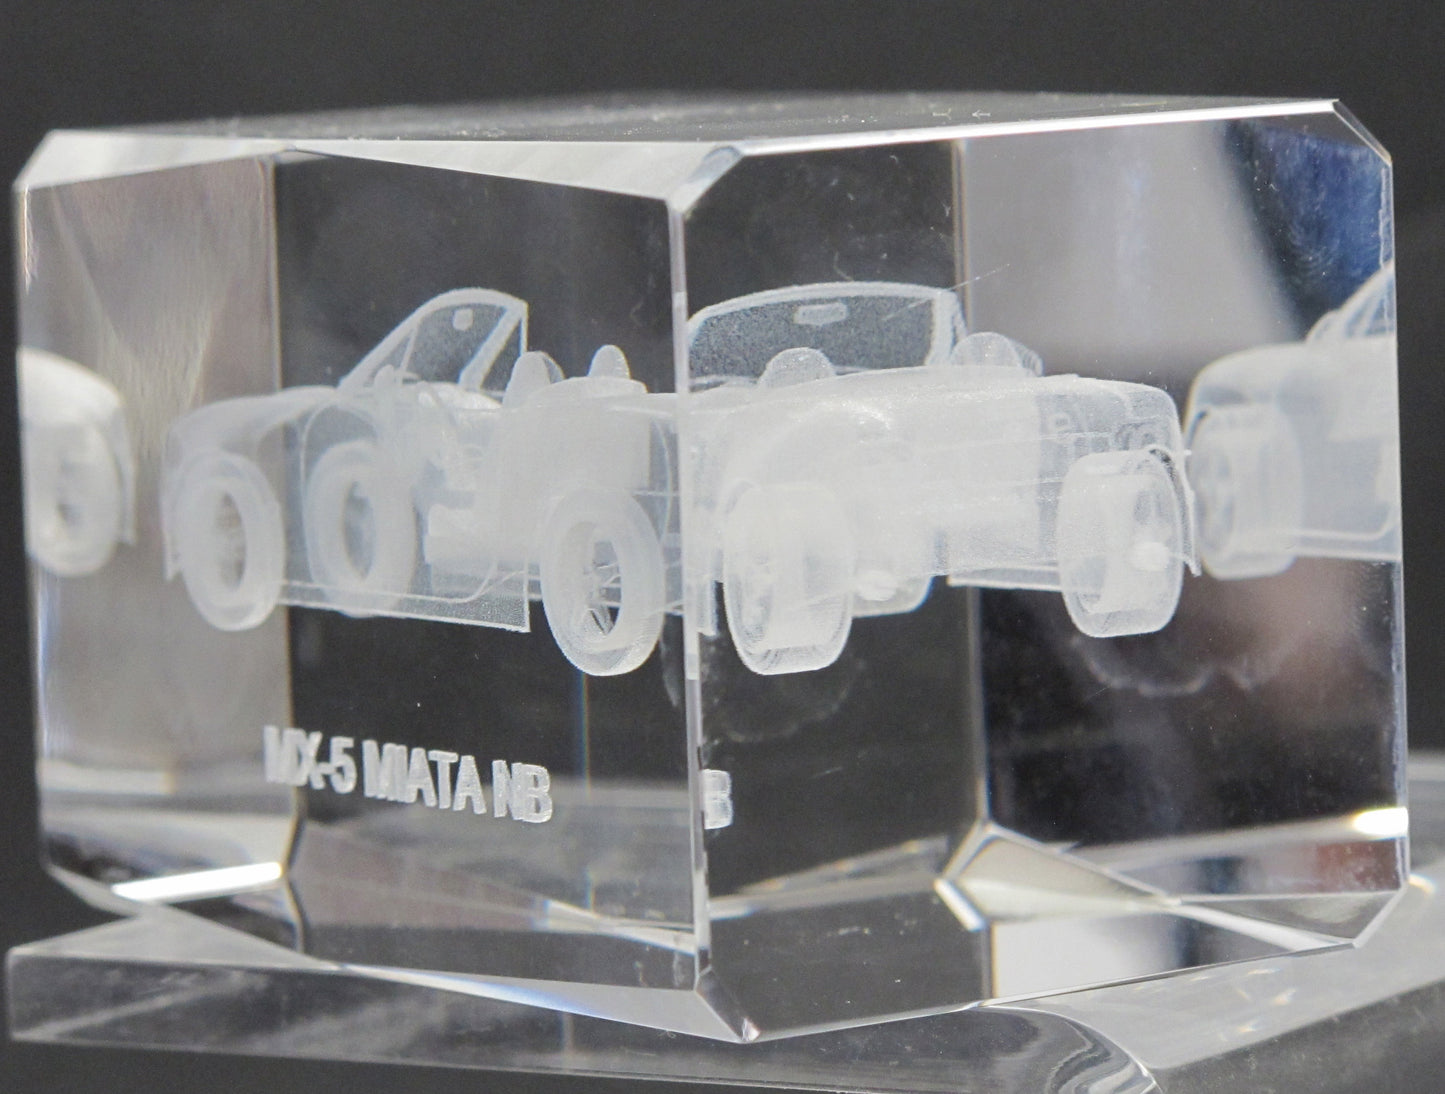 MX-5 MIATA NB glass paperweight, Great gift - O'Rourke crystal awards & gifts abp cut glass